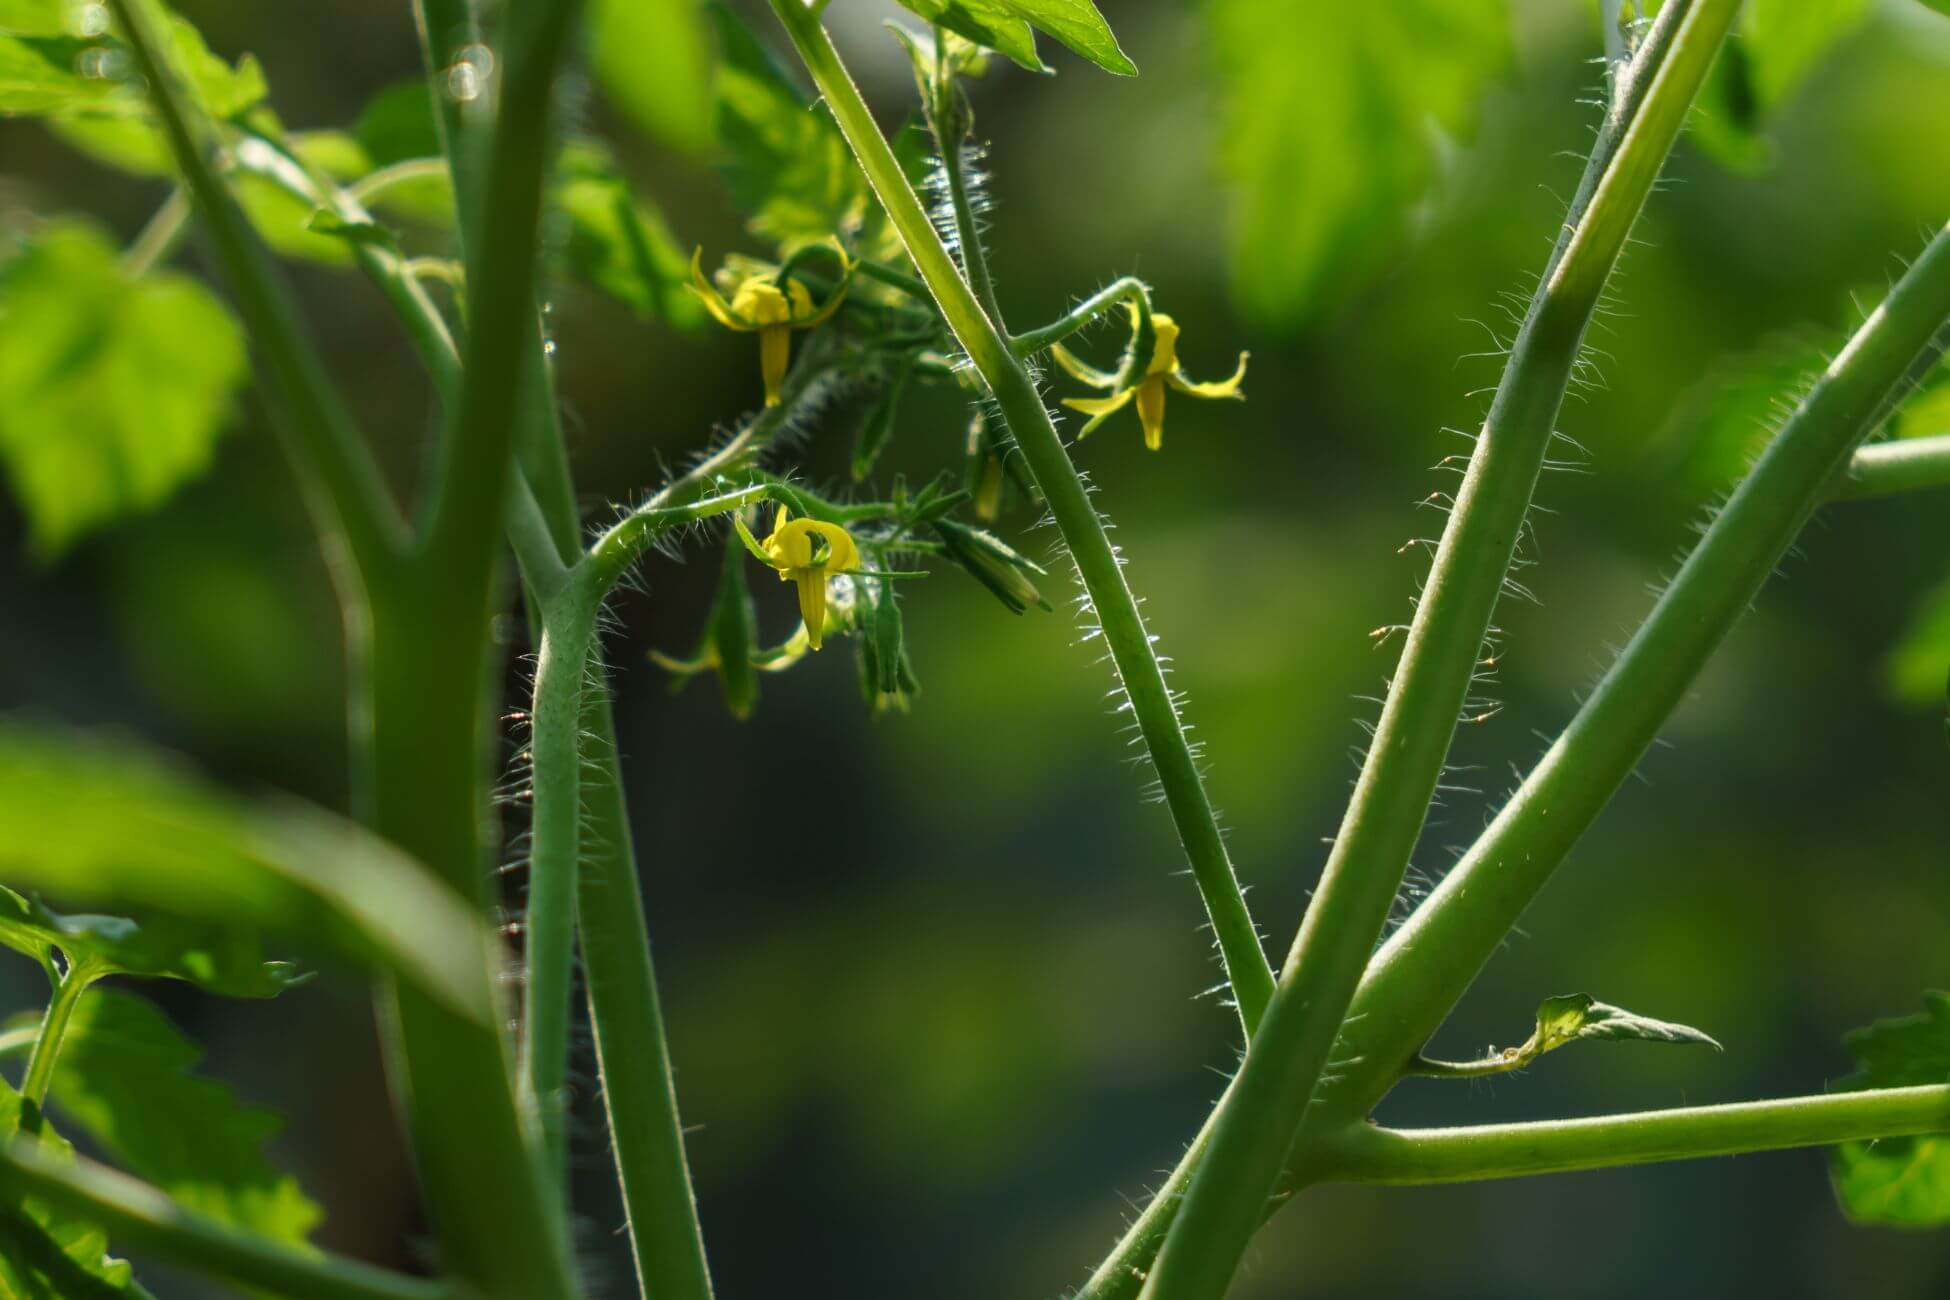 Close-up of an open-pollinated tomato plant stem with small yellow flowers, featuring fine hairs on green stems. Background filled with blurred green leaves, sunlight highlighting plant texture.